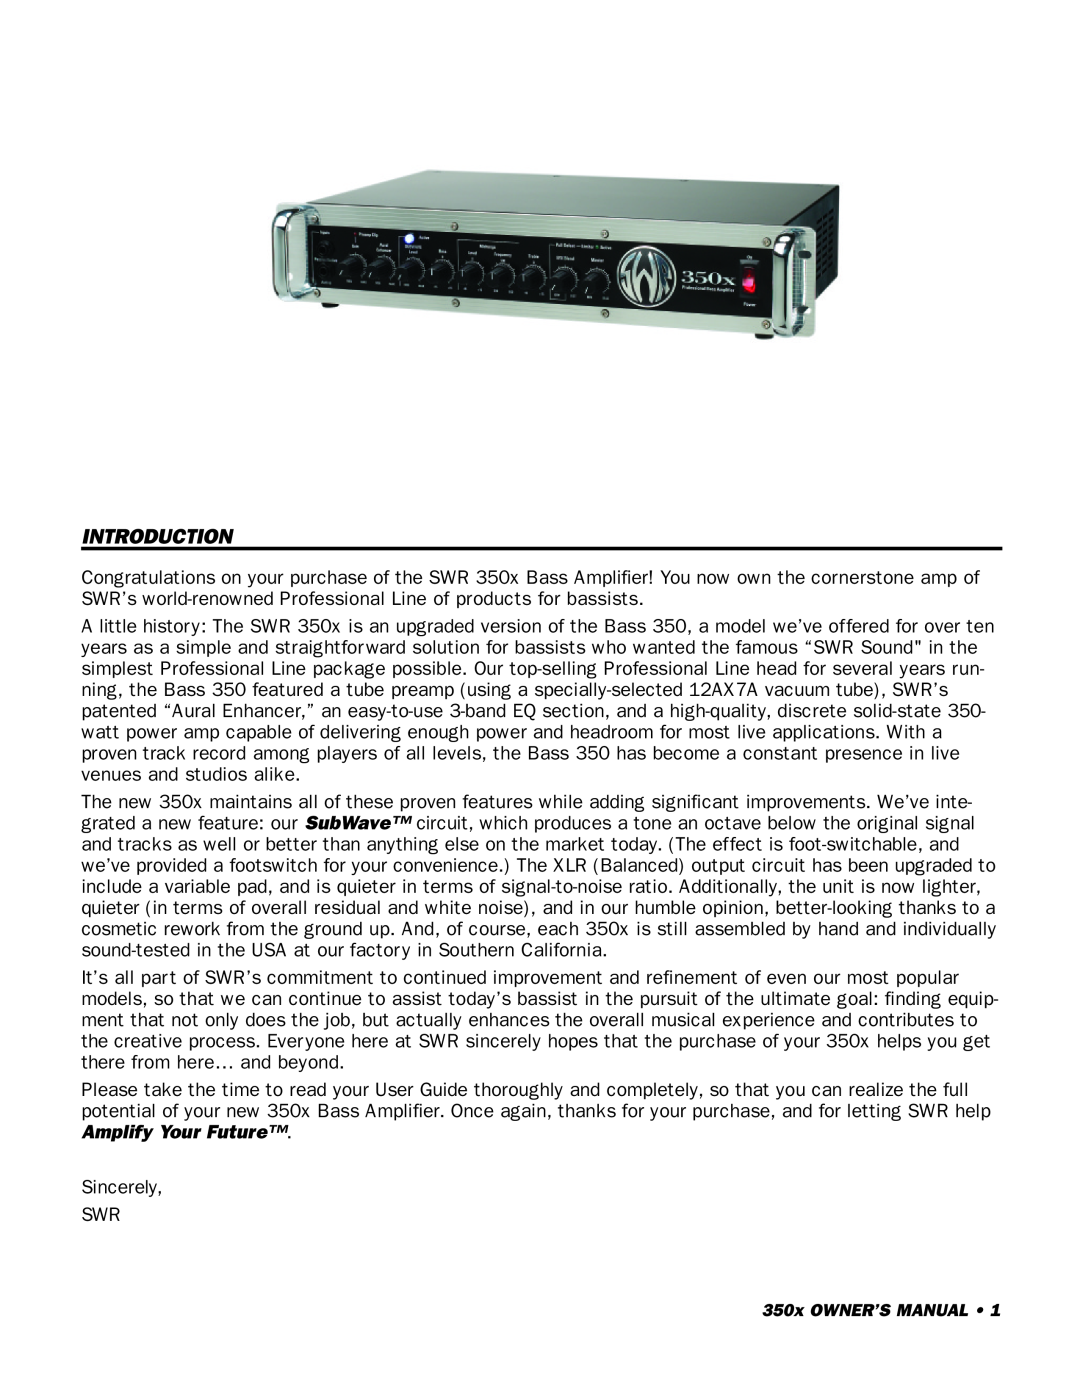 SWR Sound 350x owner manual Introduction 